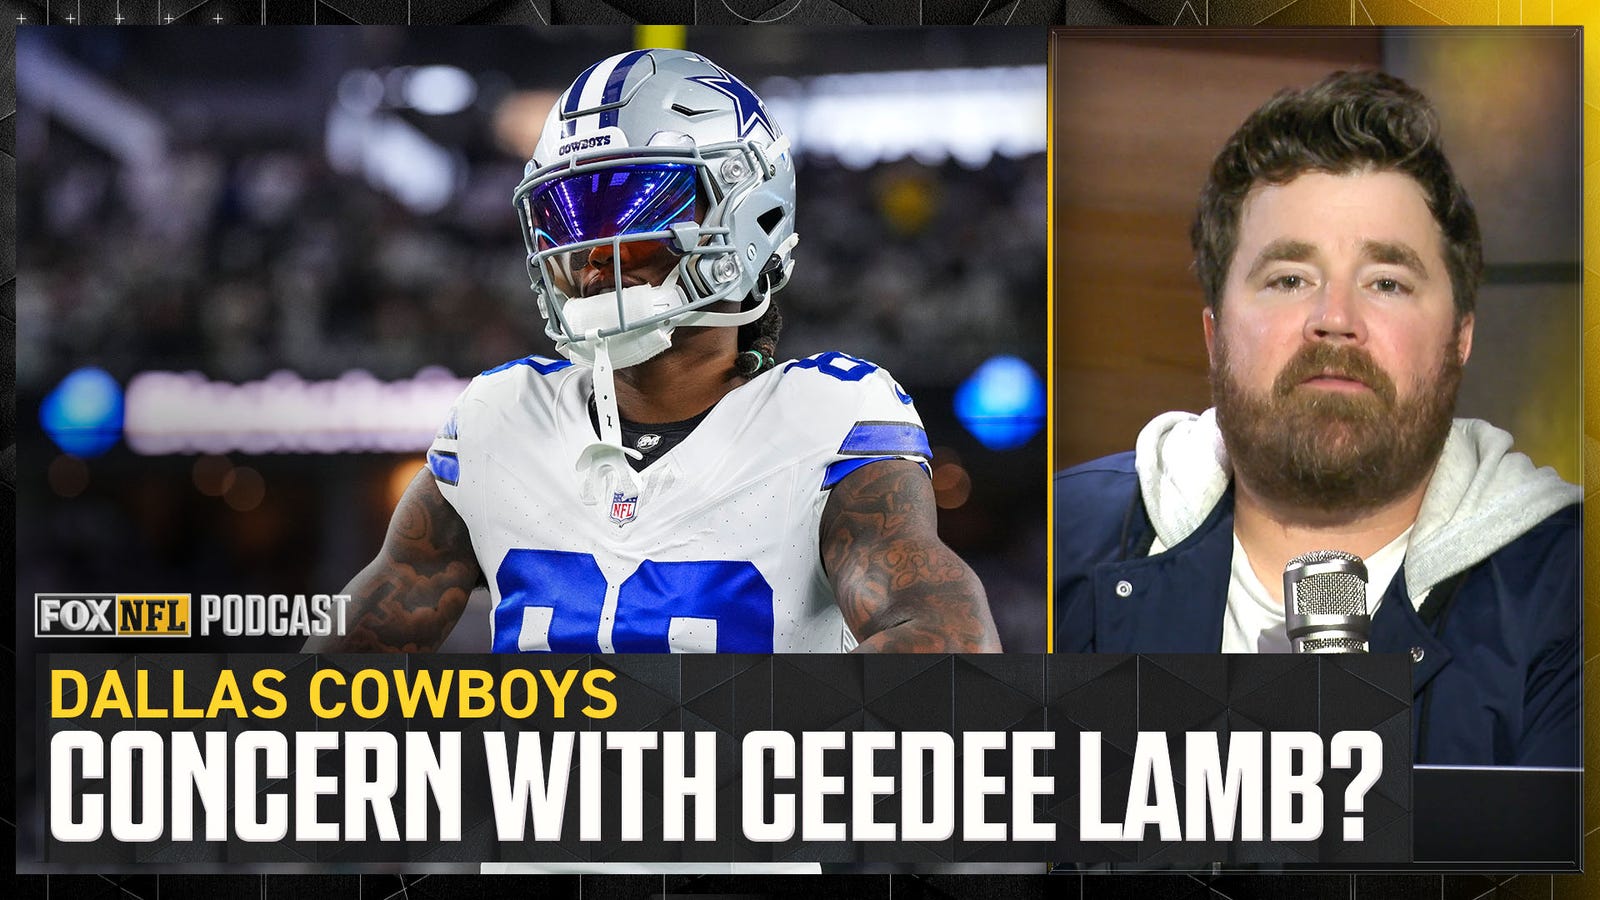 Should the Dallas Cowboys be WORRIED about CeeDee Lamb?